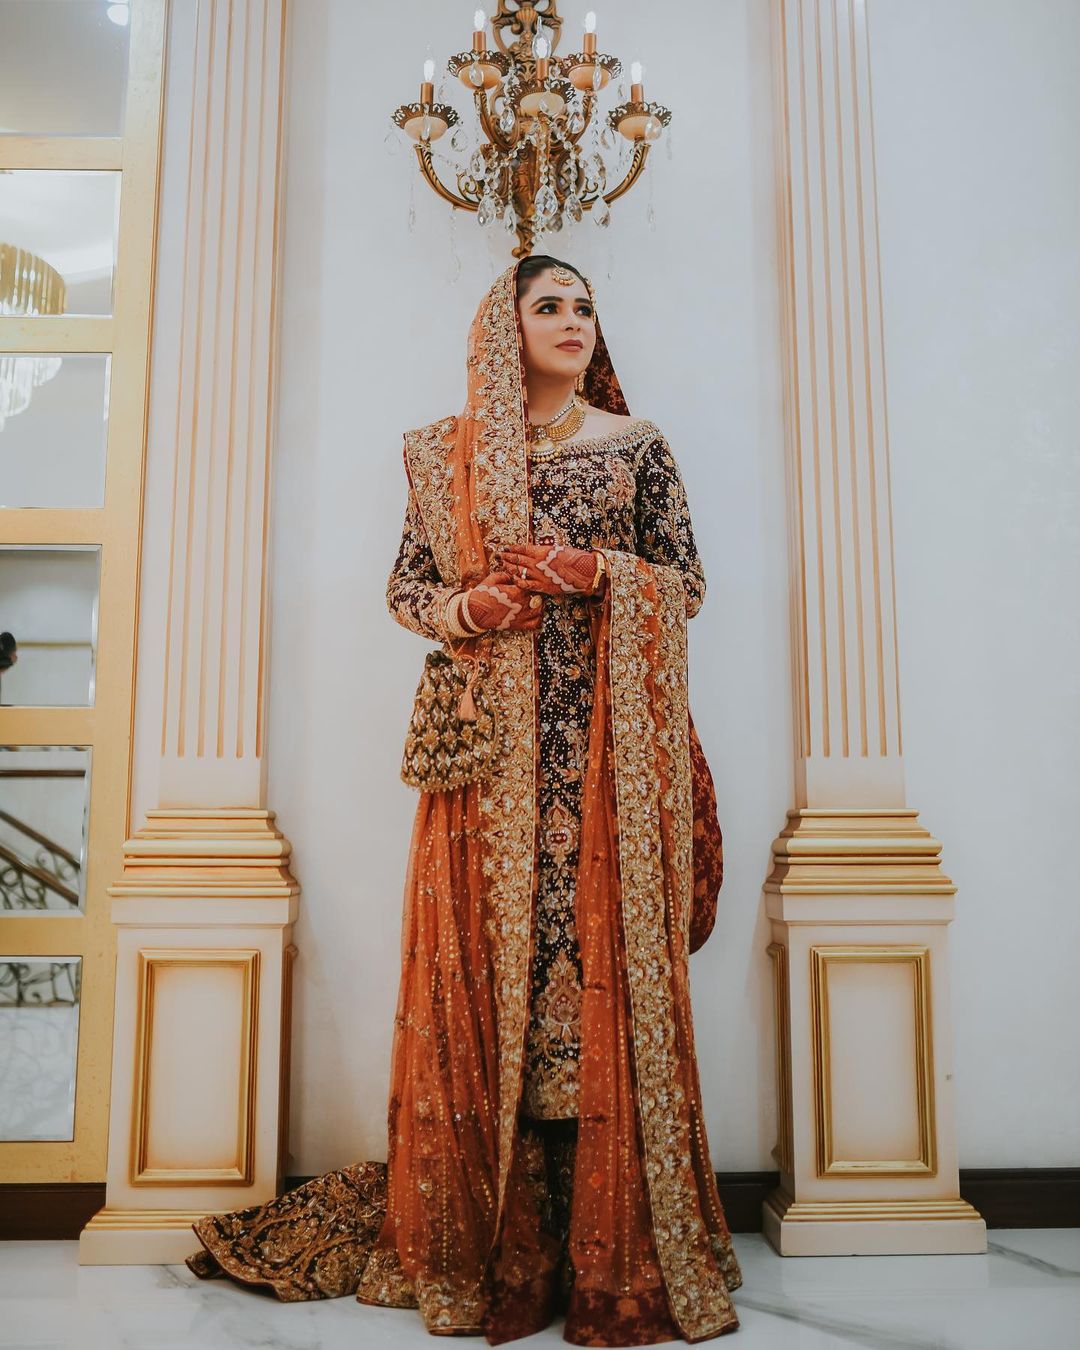 heavily embellished Muslim bridal outfit